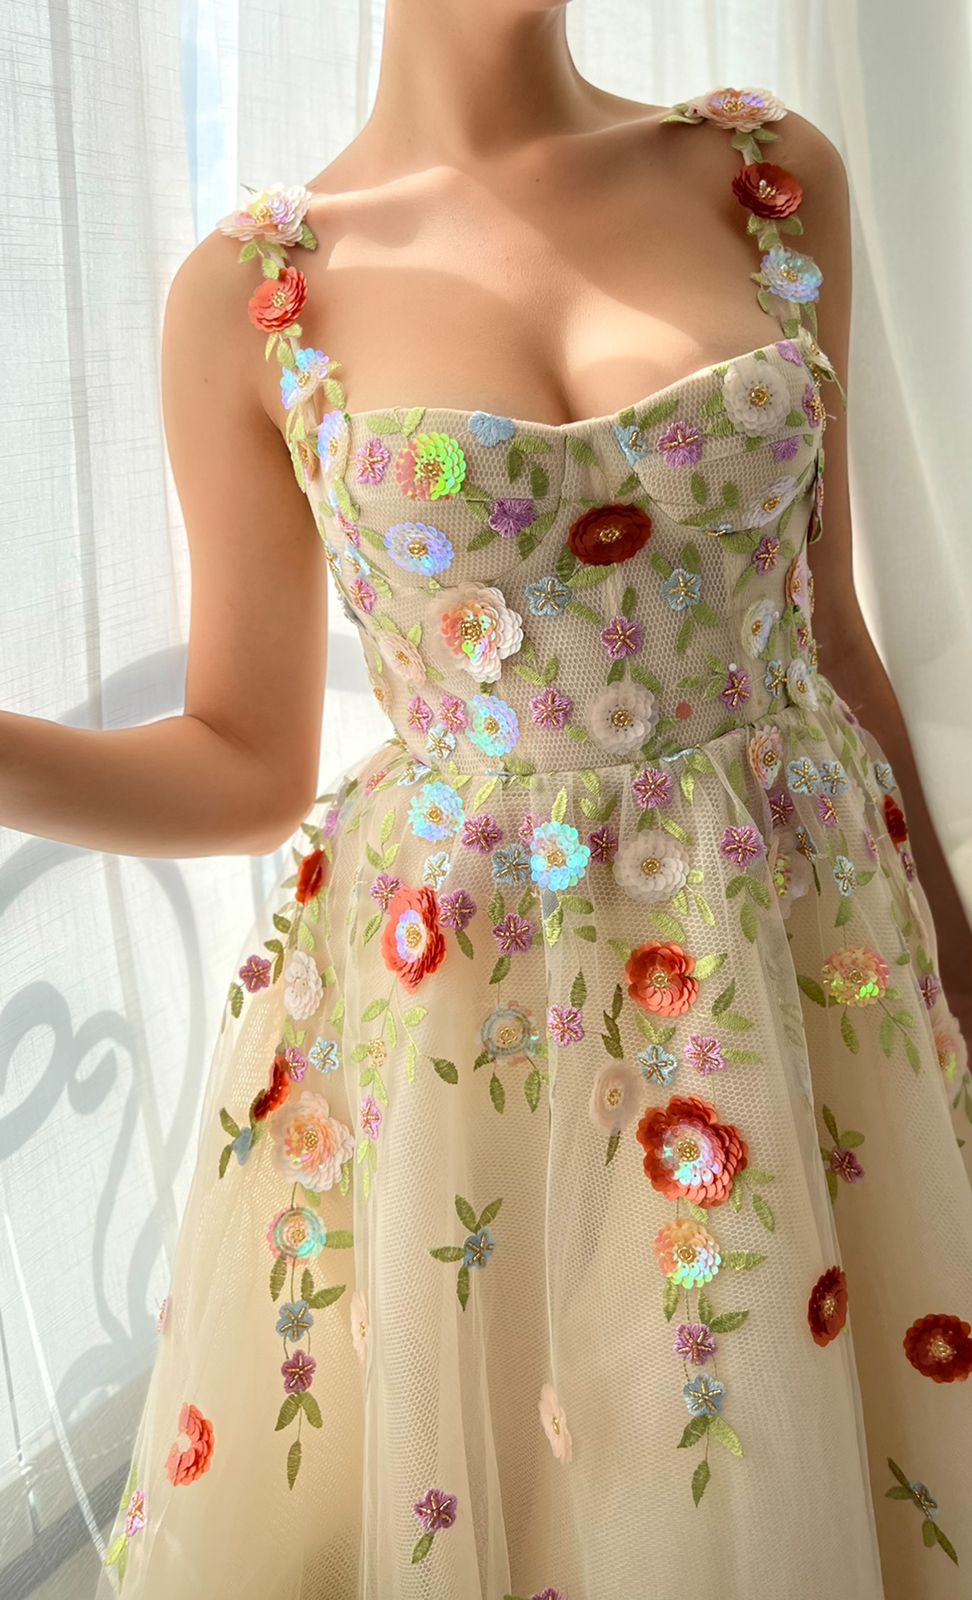 Beige A-Line dress with spaghetti straps, embroidery and flowers